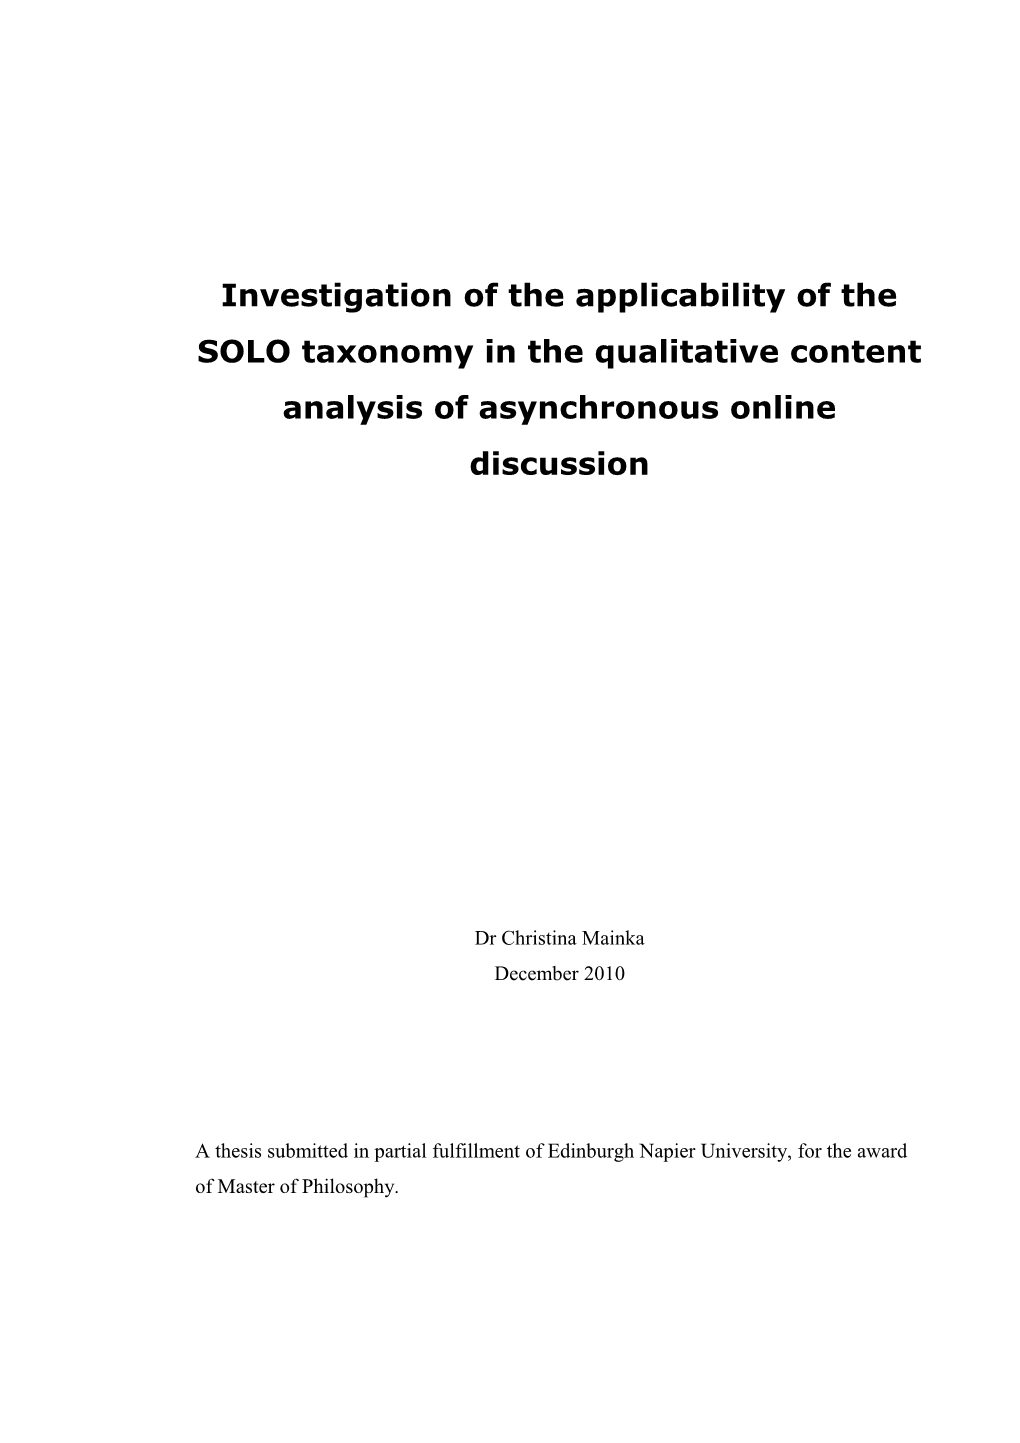 Investigation of the Applicability of the SOLO Taxonomy in the Qualitative Content Analysis